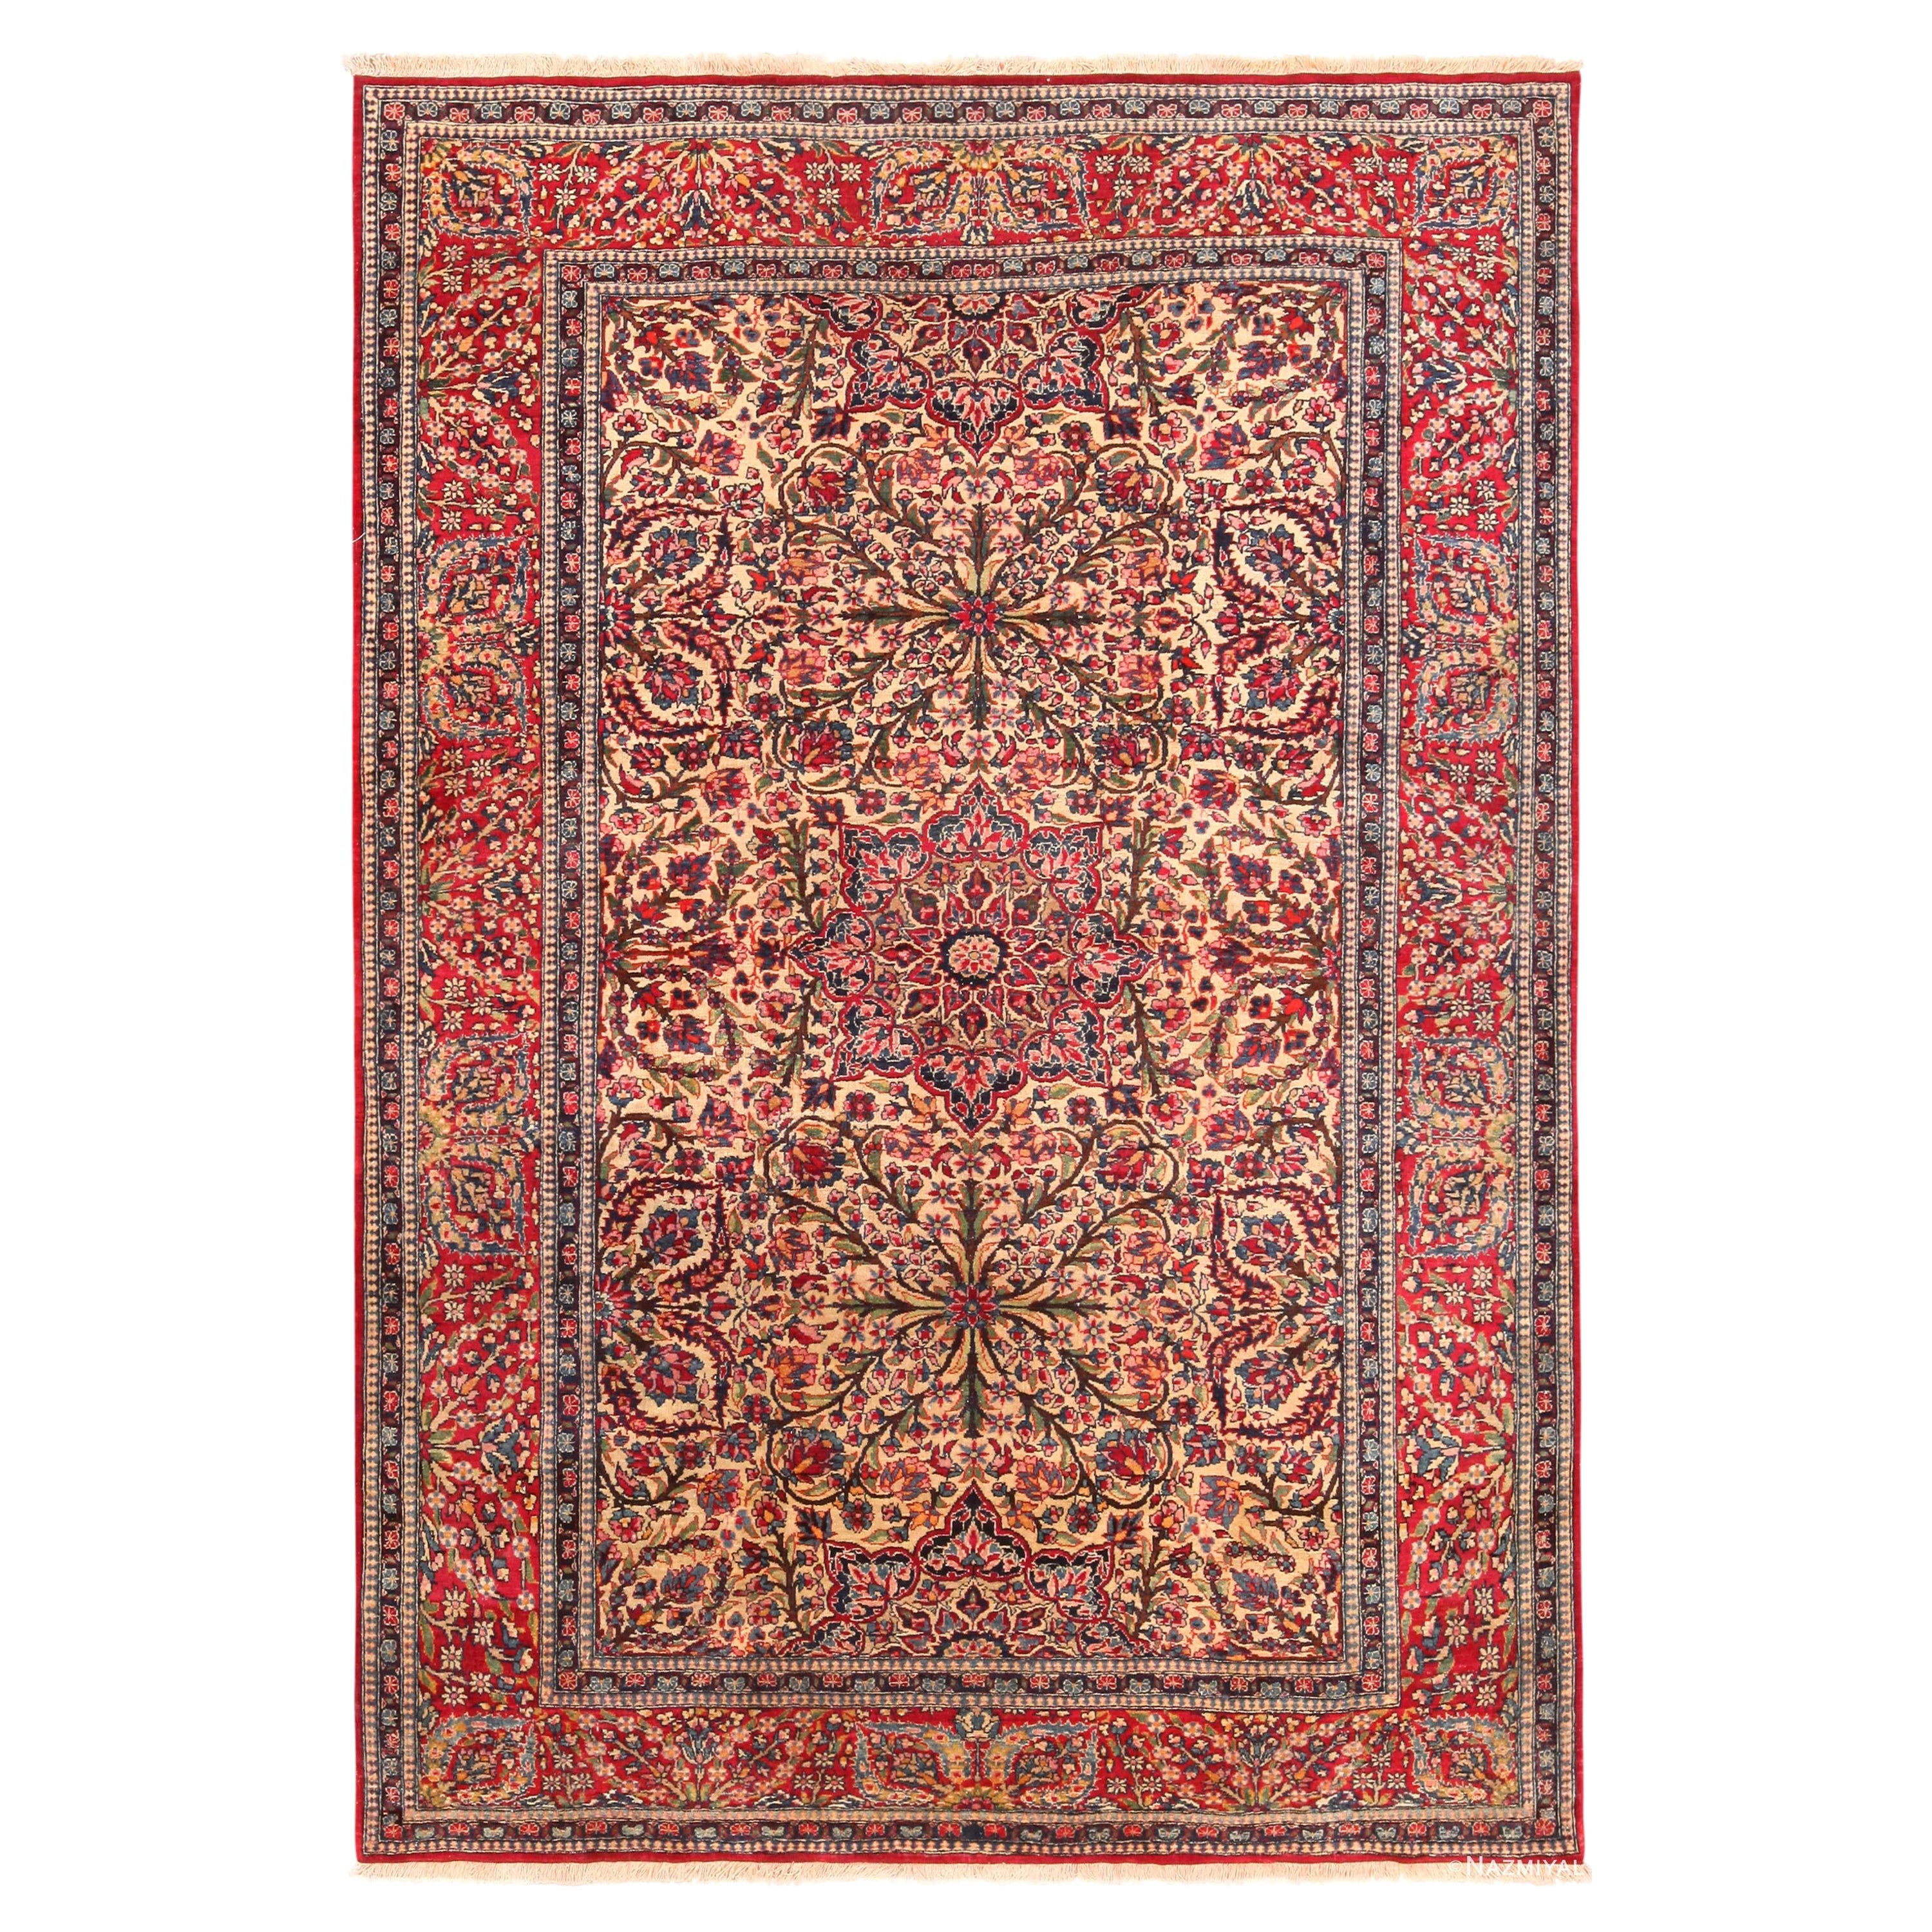 Nazmiyal Collection Antique Persian Isfahan Rug. Size 4 ft 6 in x 6 ft 8 in